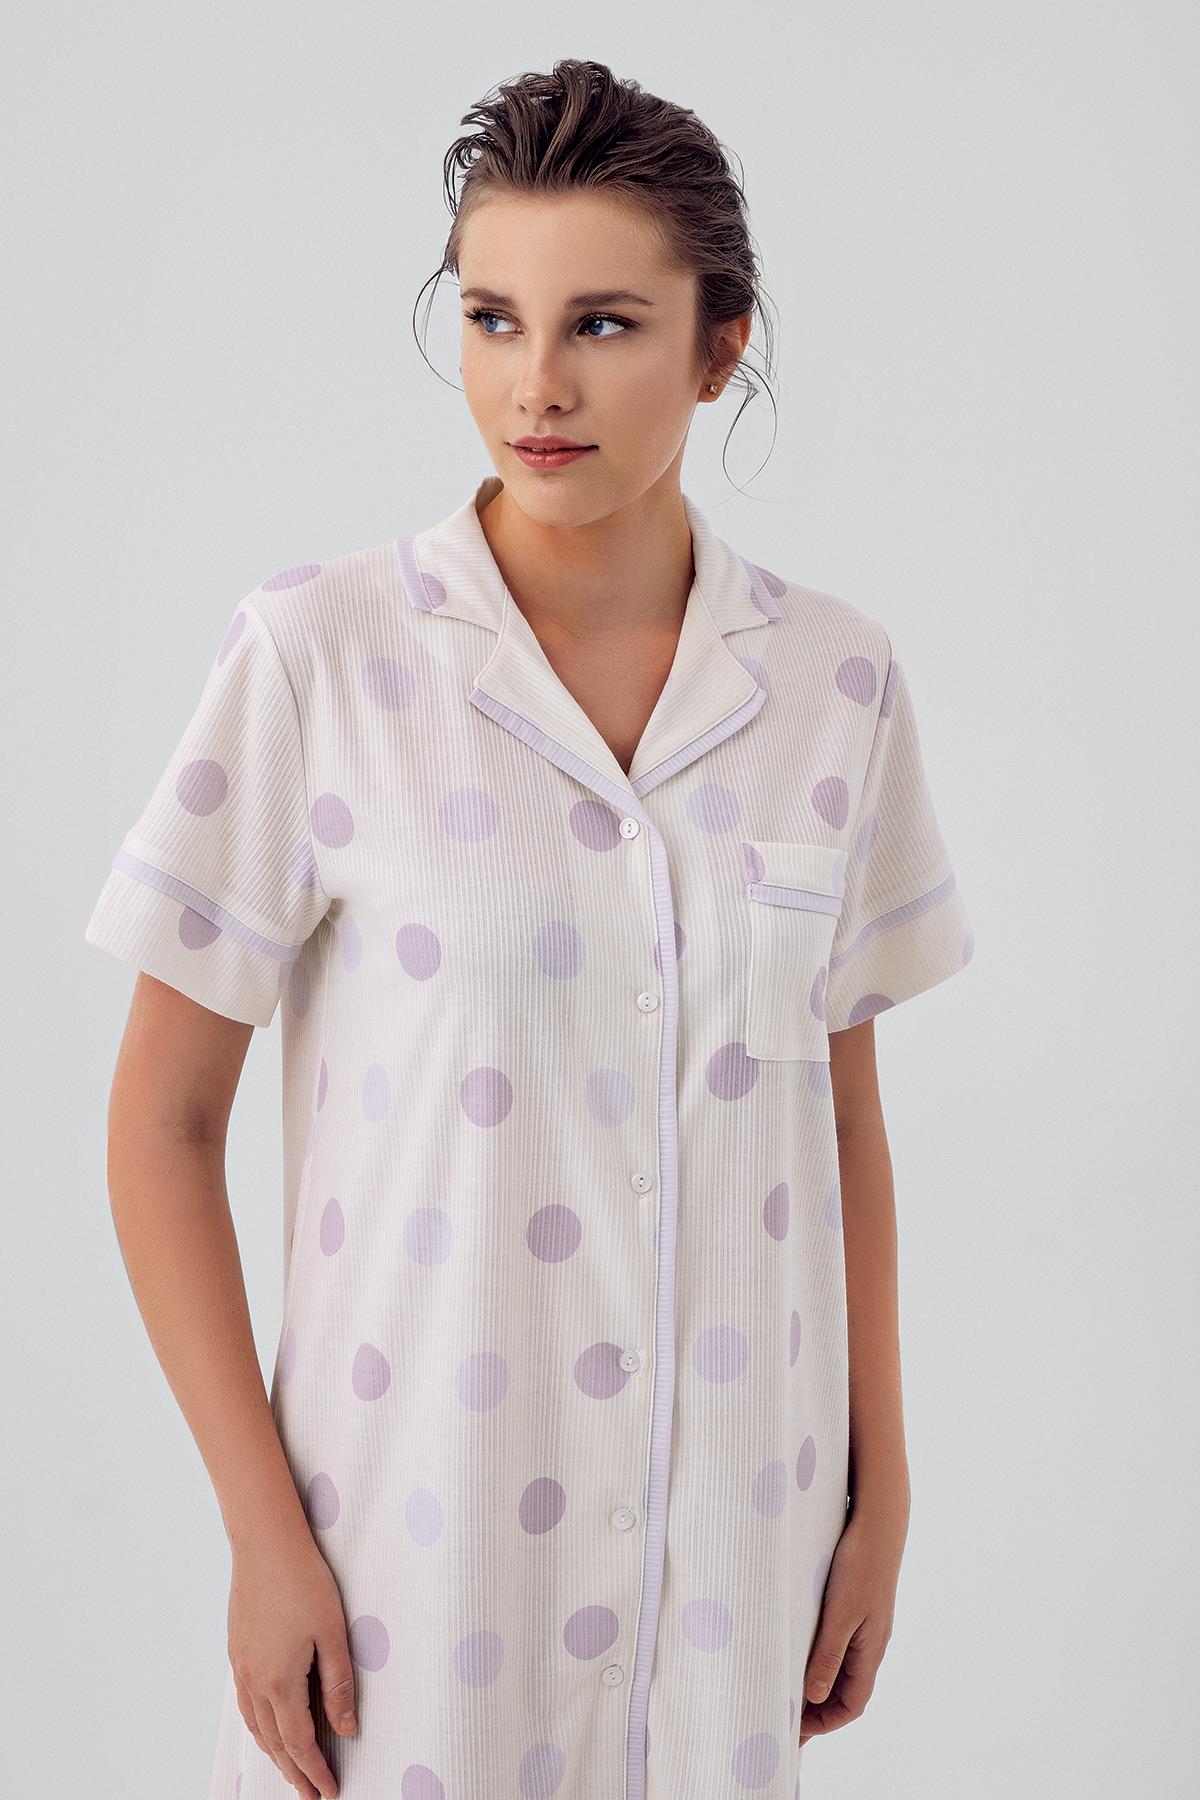 Buttoned Polka Dot Short Sleeved Flexible Viscose Nightgown 16100